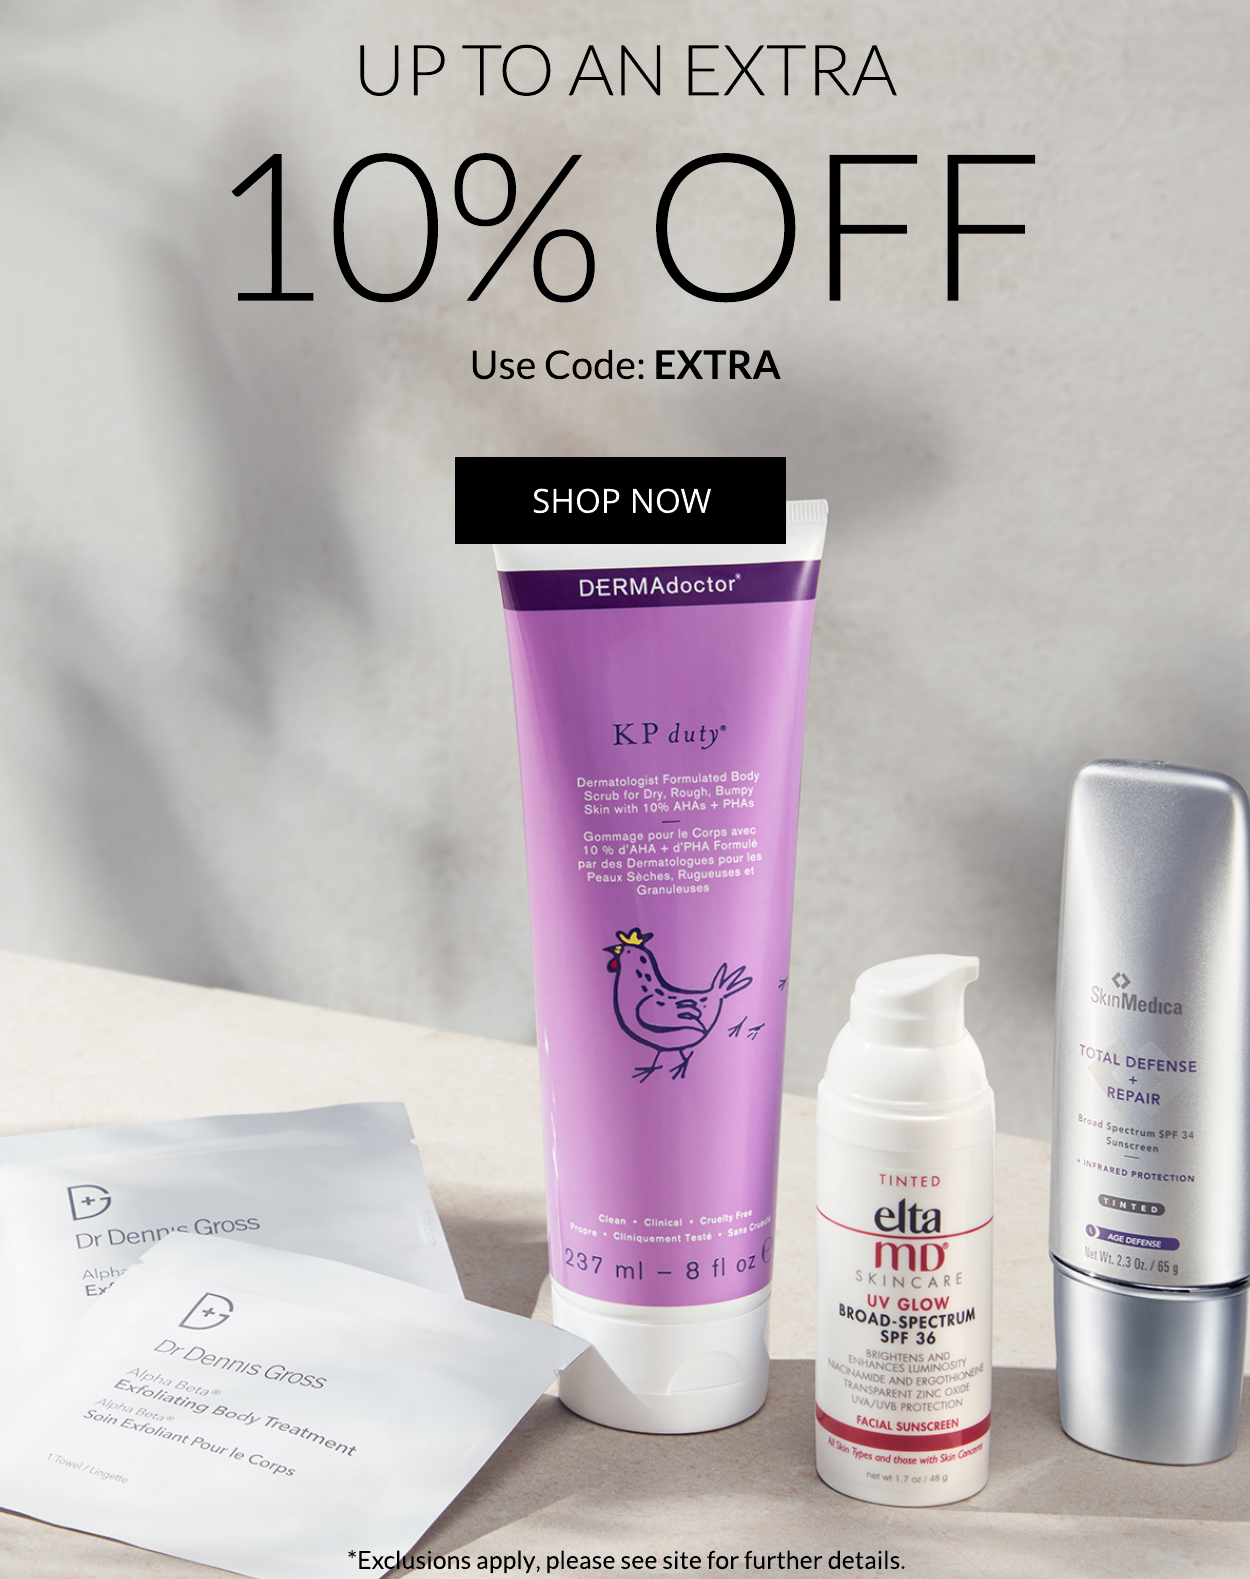 Up to an Extra 10% off